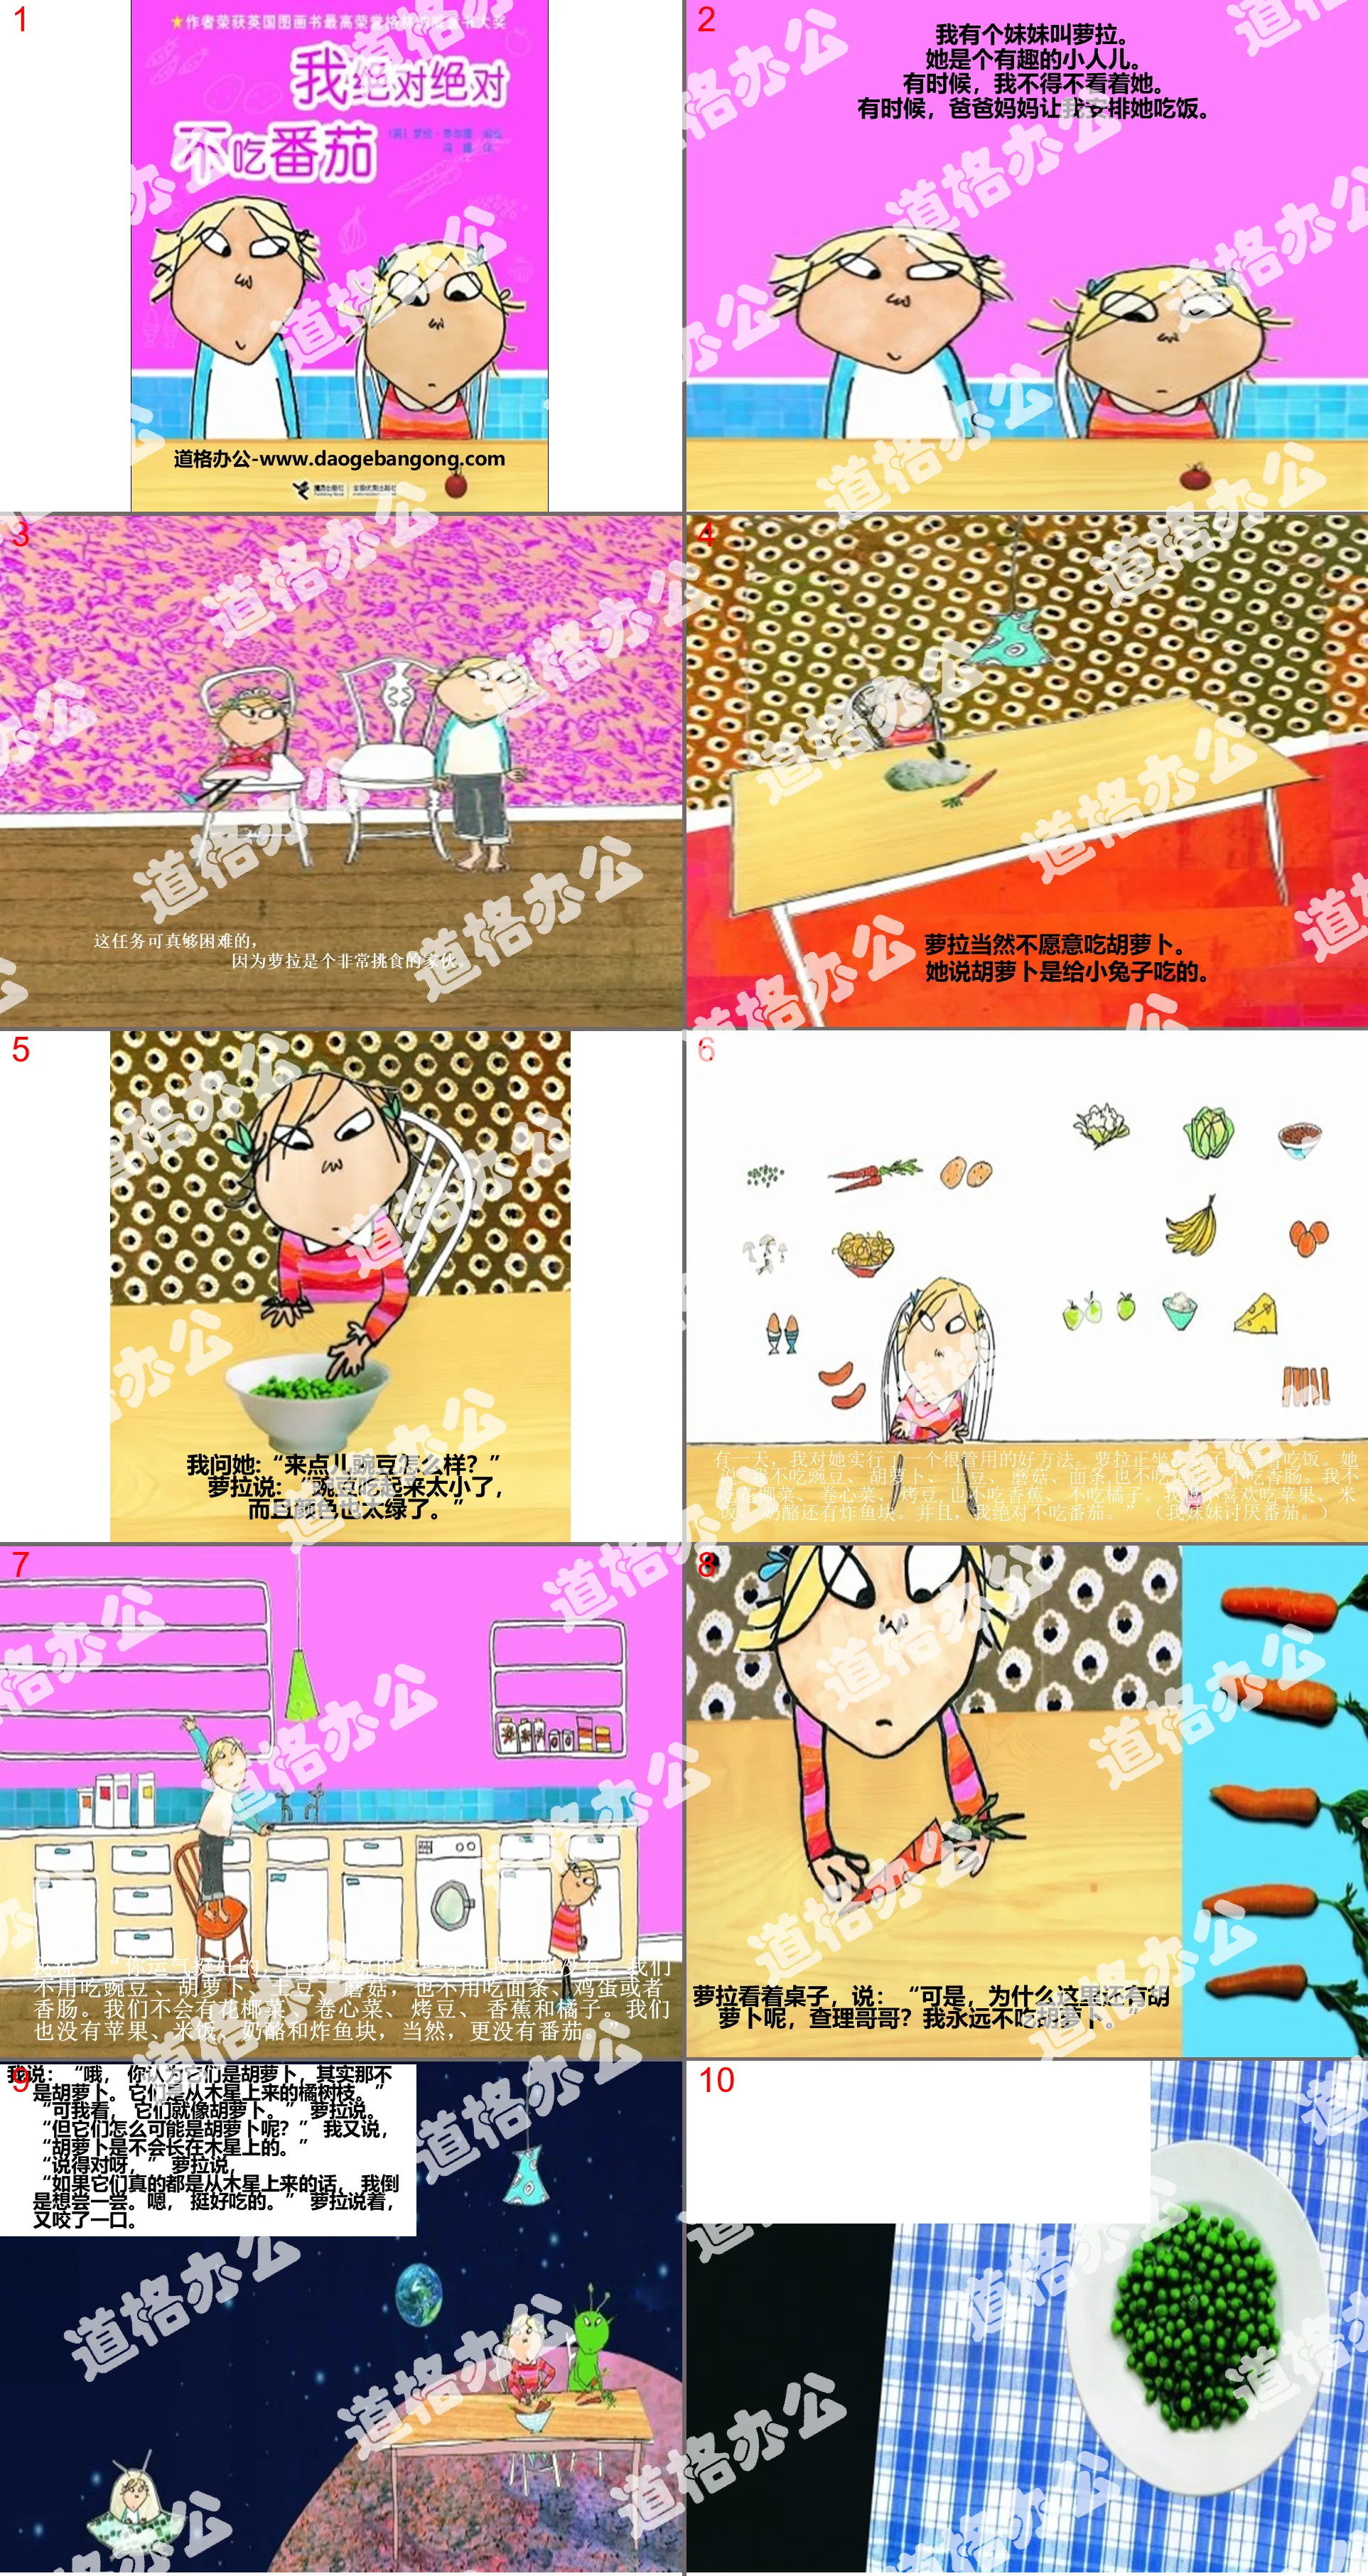 "I will never eat tomatoes" picture book story PPT